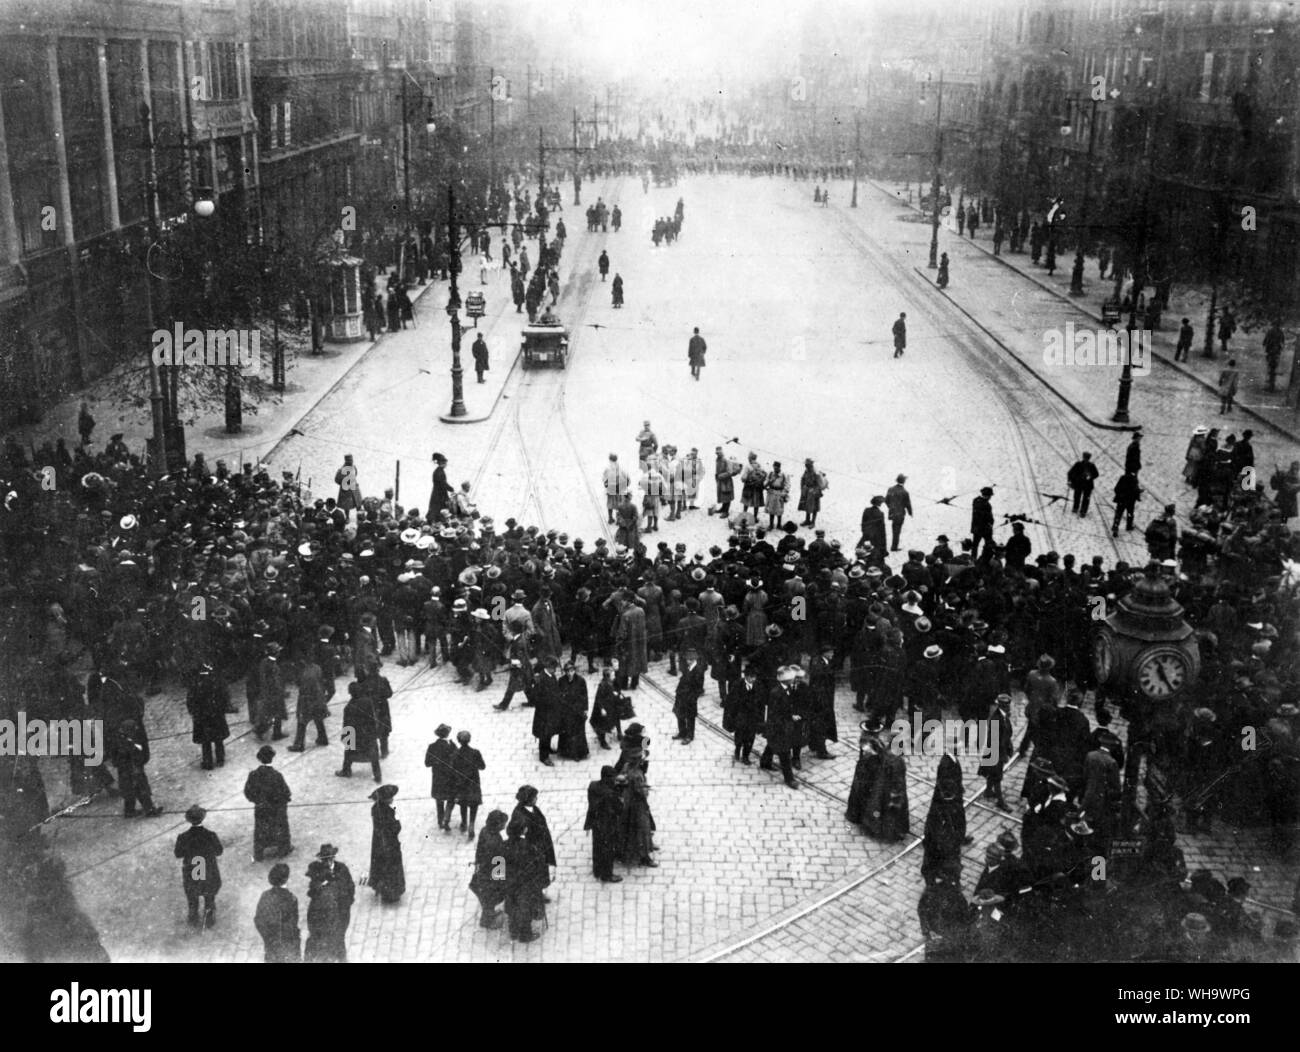 WW1/ Institute of Military History, Prague. Military detachments from Austrian Army quelling the revolt, Wencelsas Square, Prague, October 14th 1918. Stock Photo